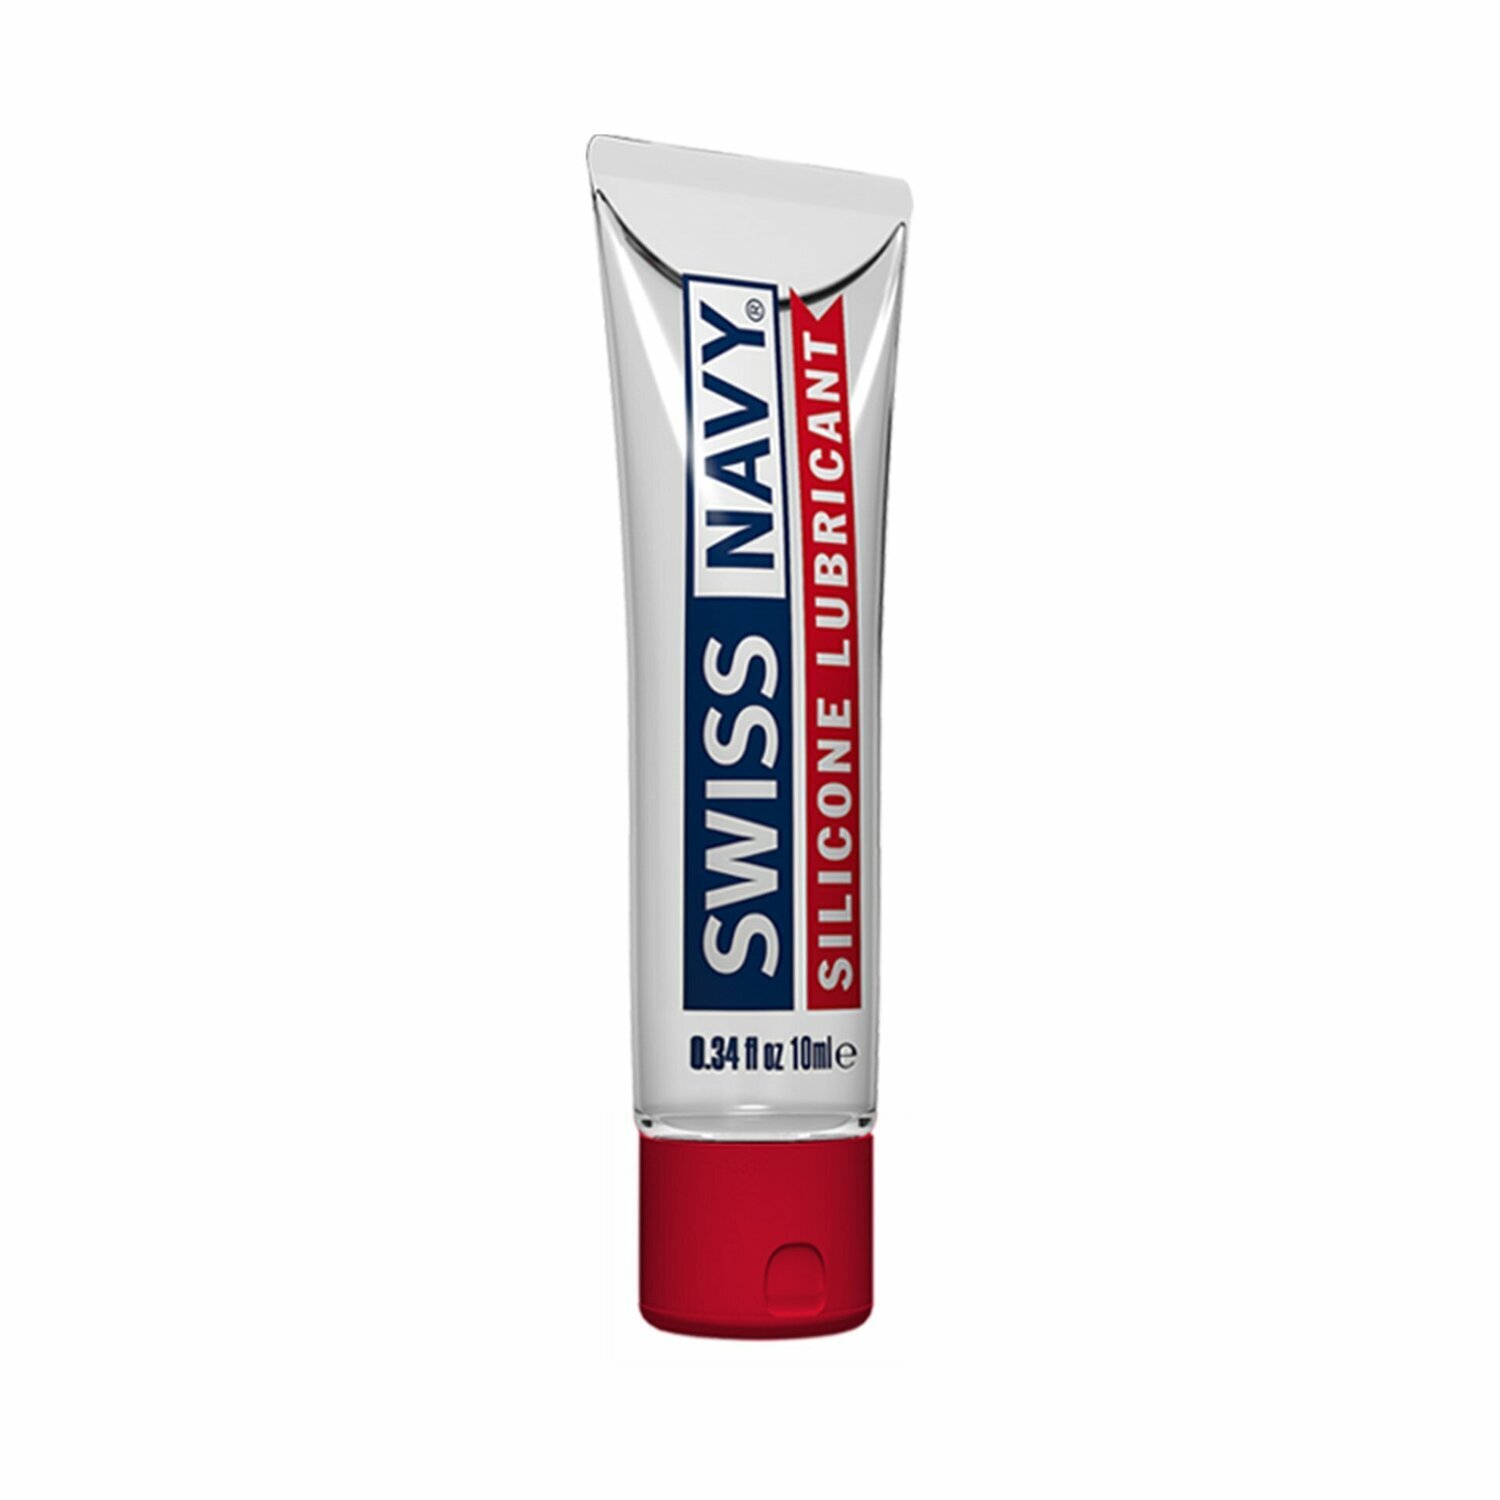 Swiss Navy - Silicone Lubricant - 10mL